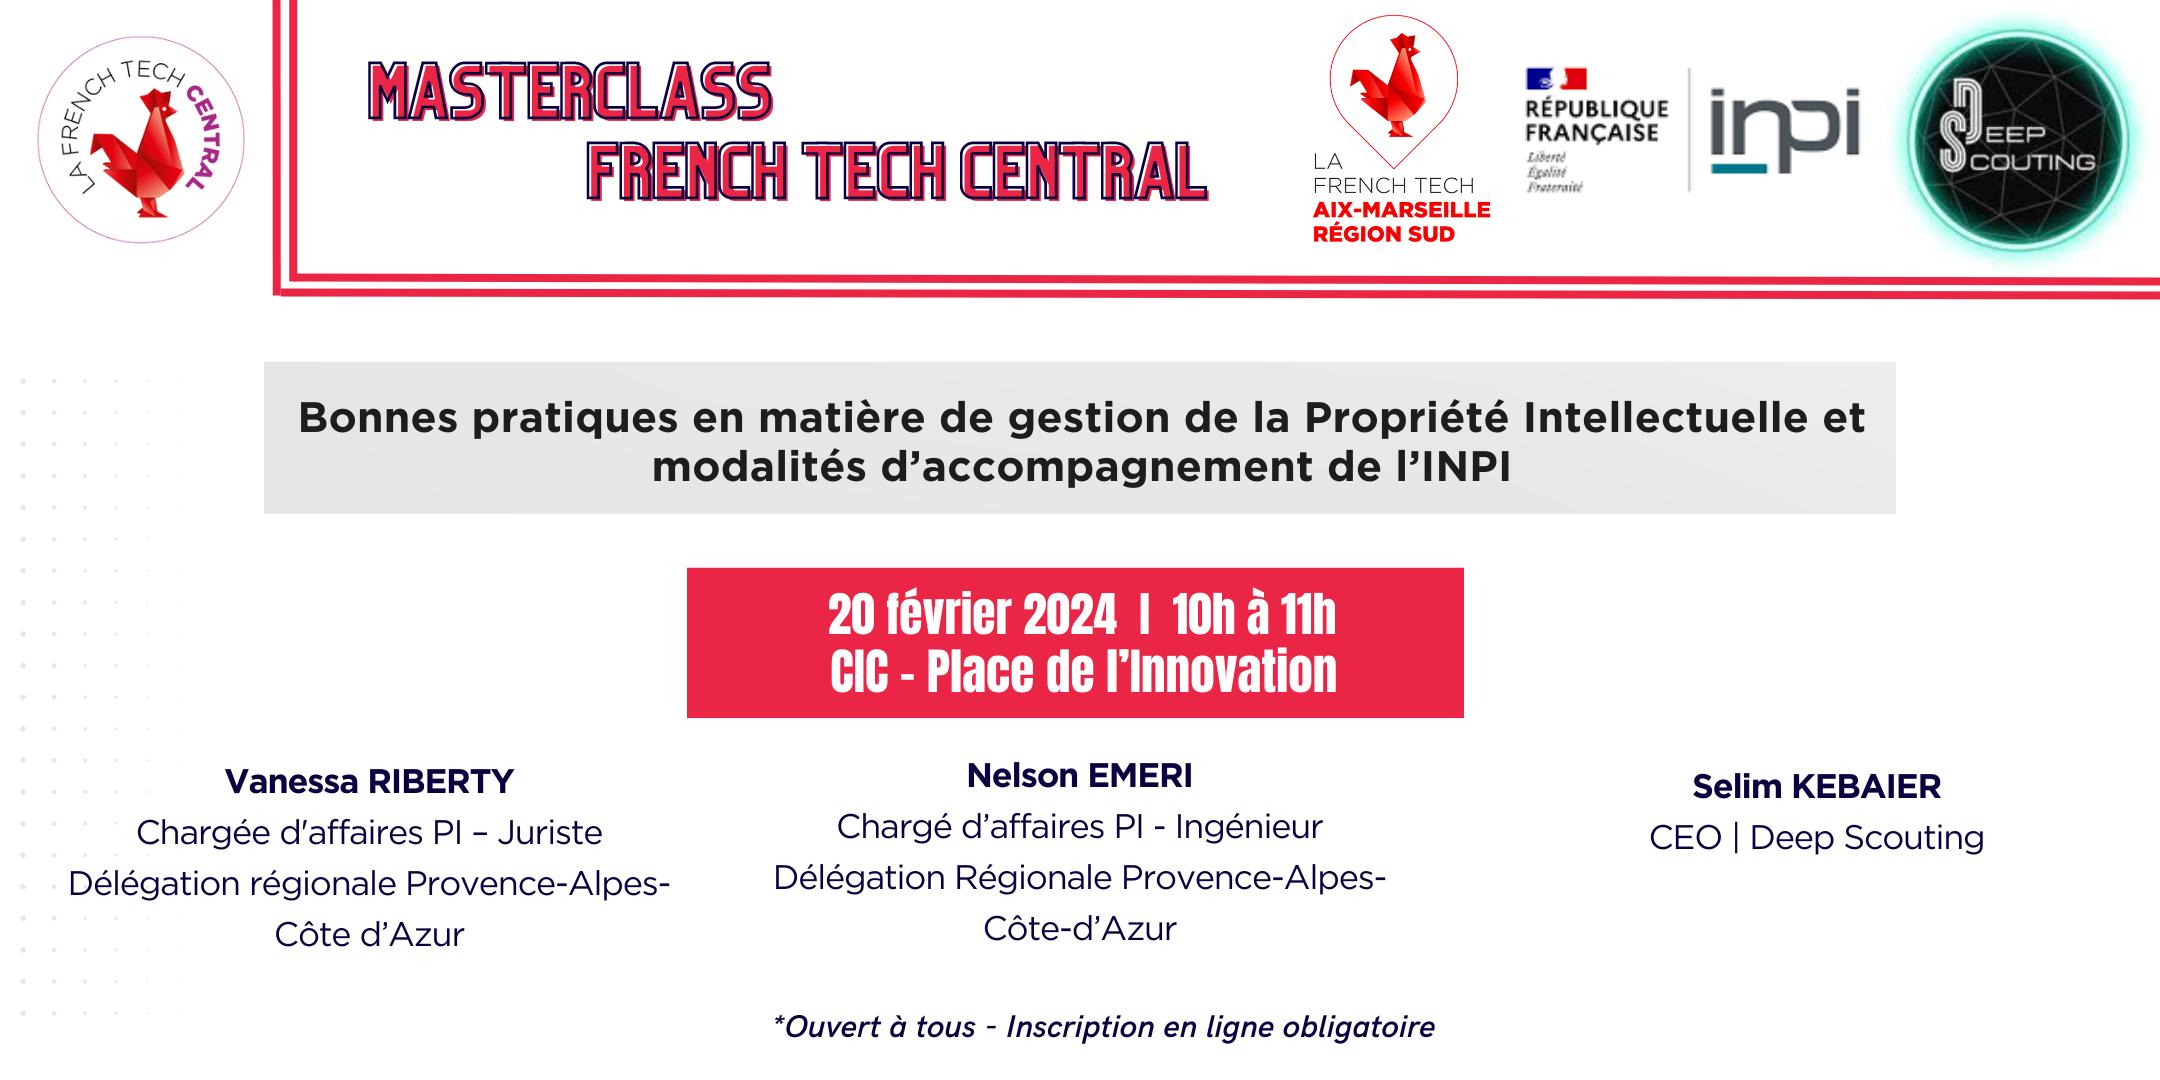 Masterclass French Tech Central – INPI